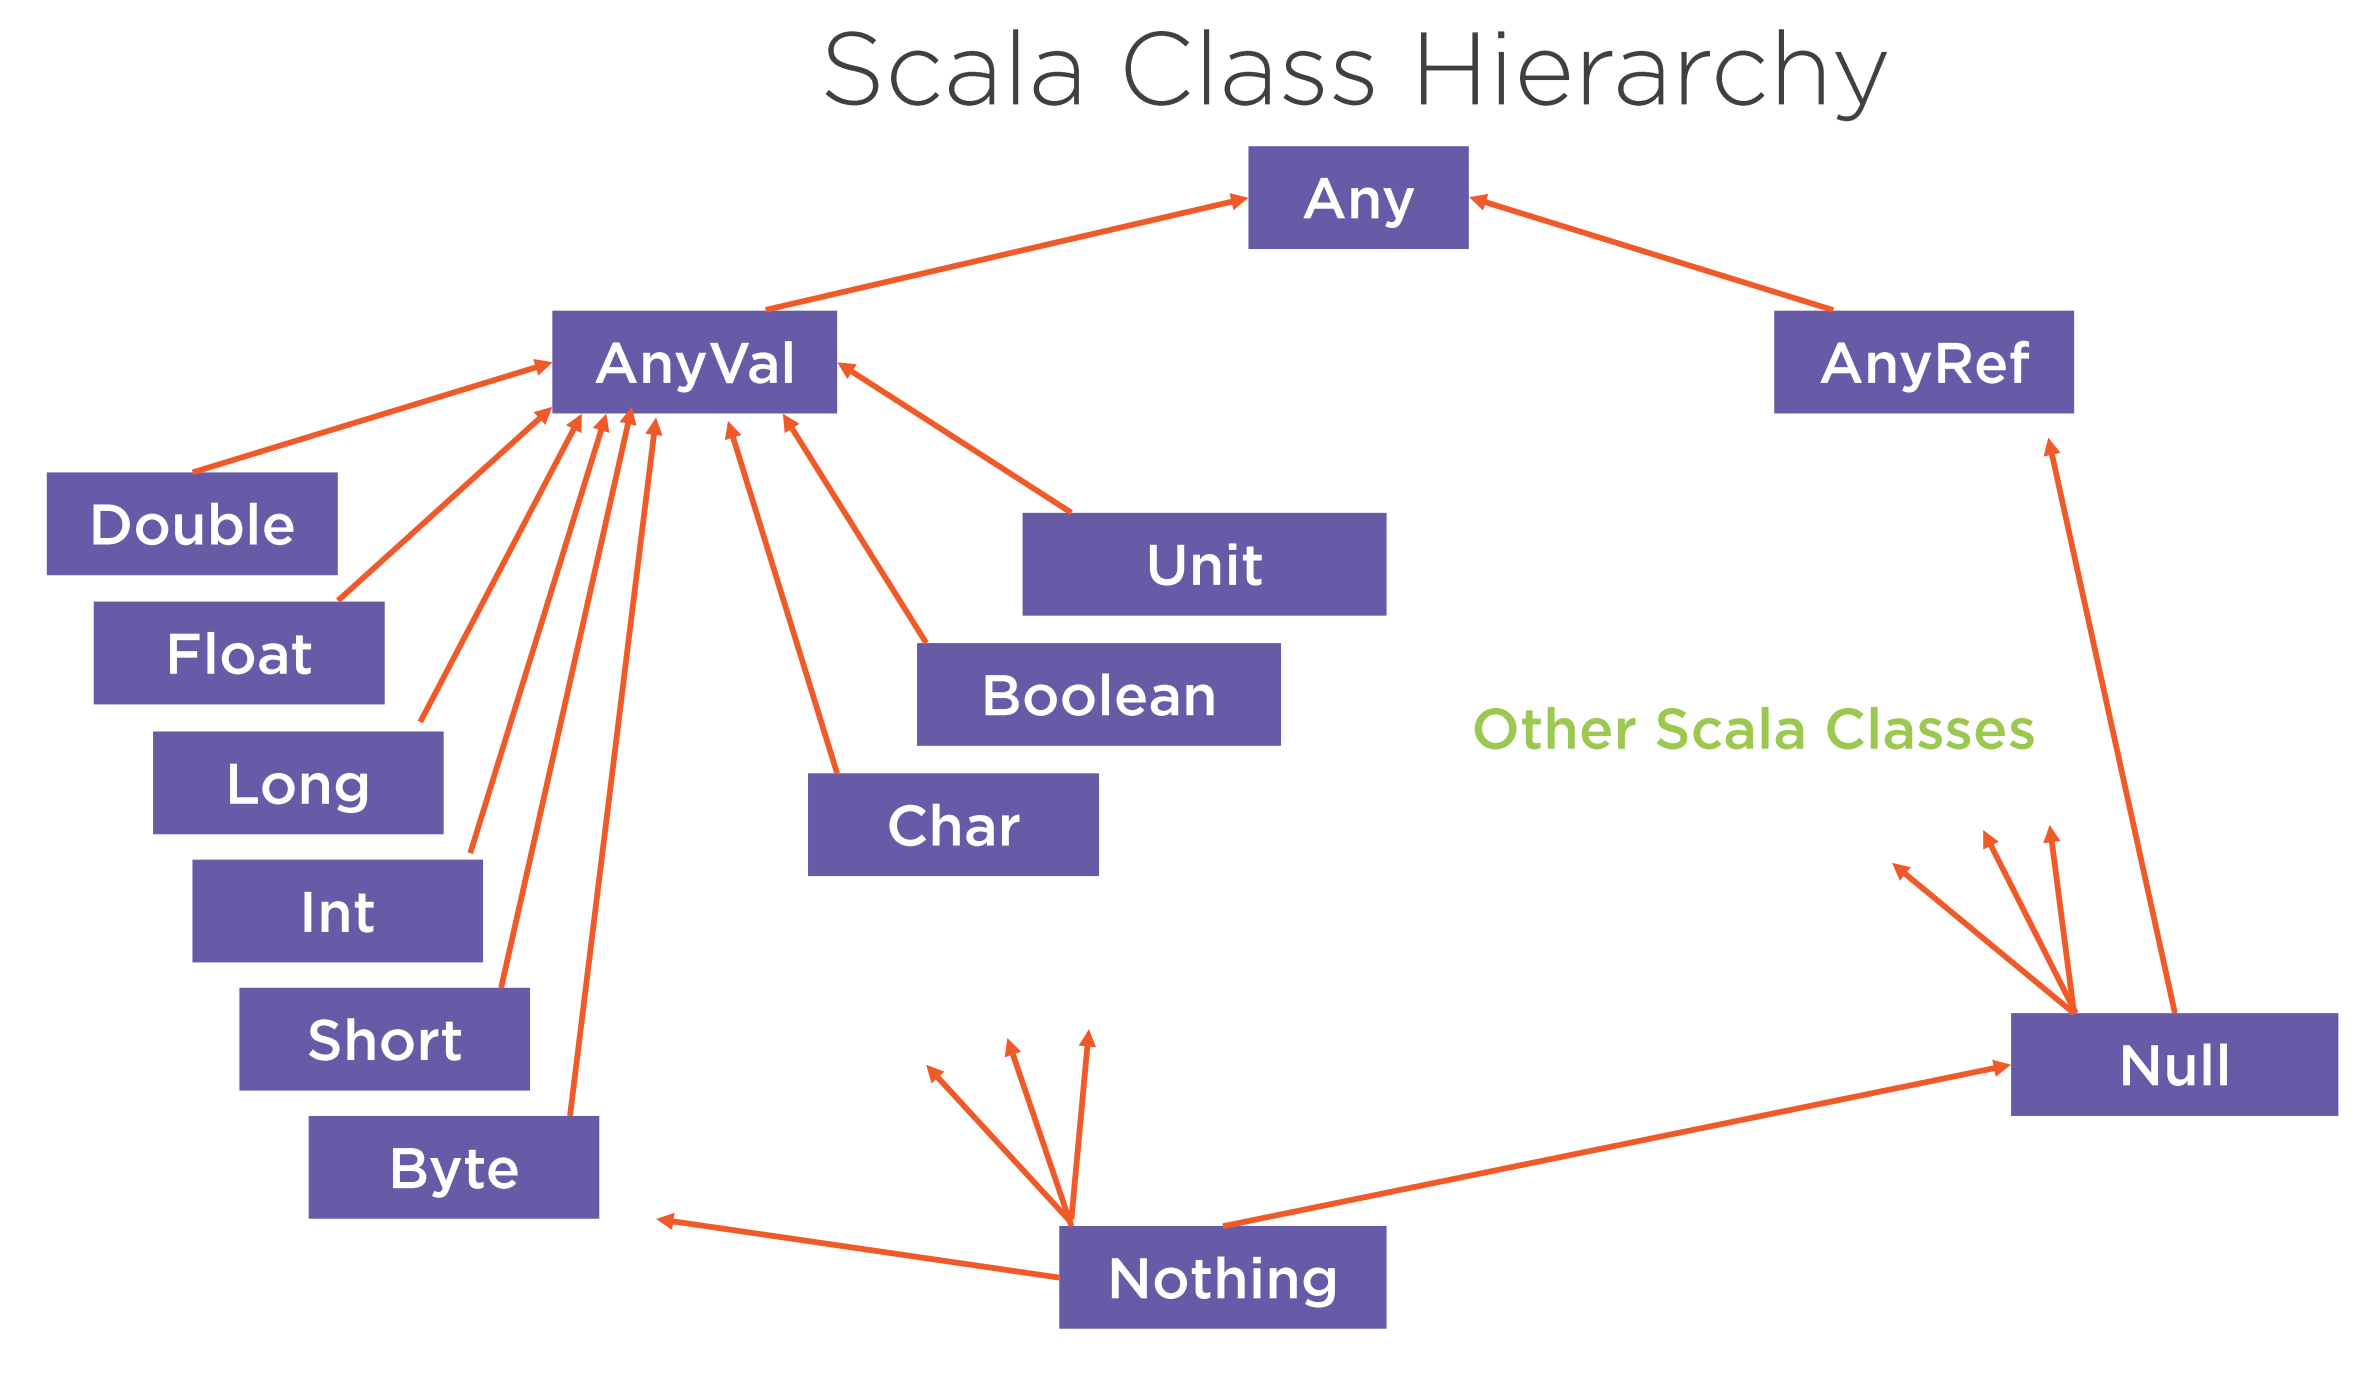 Scala Class Hierachary.png